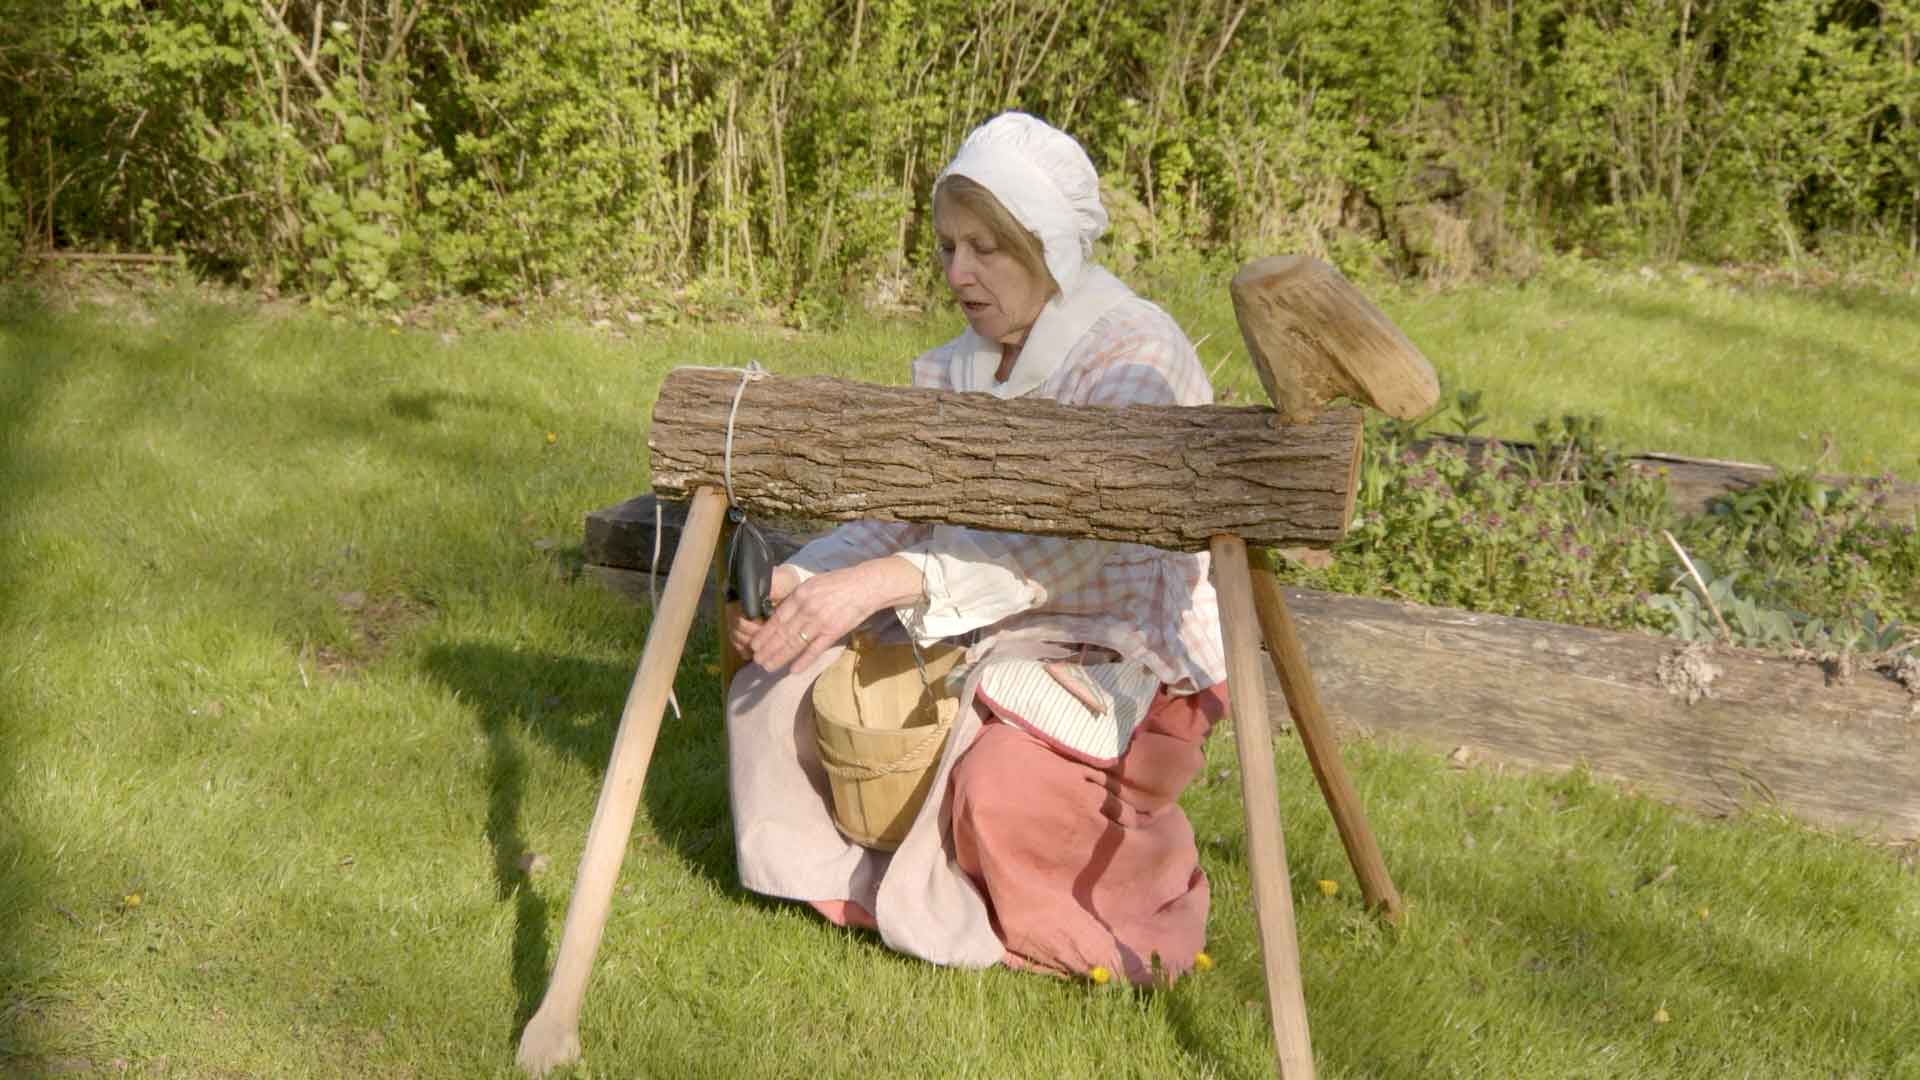 women dress in colonial era clothing demonstrates how to milk a cow